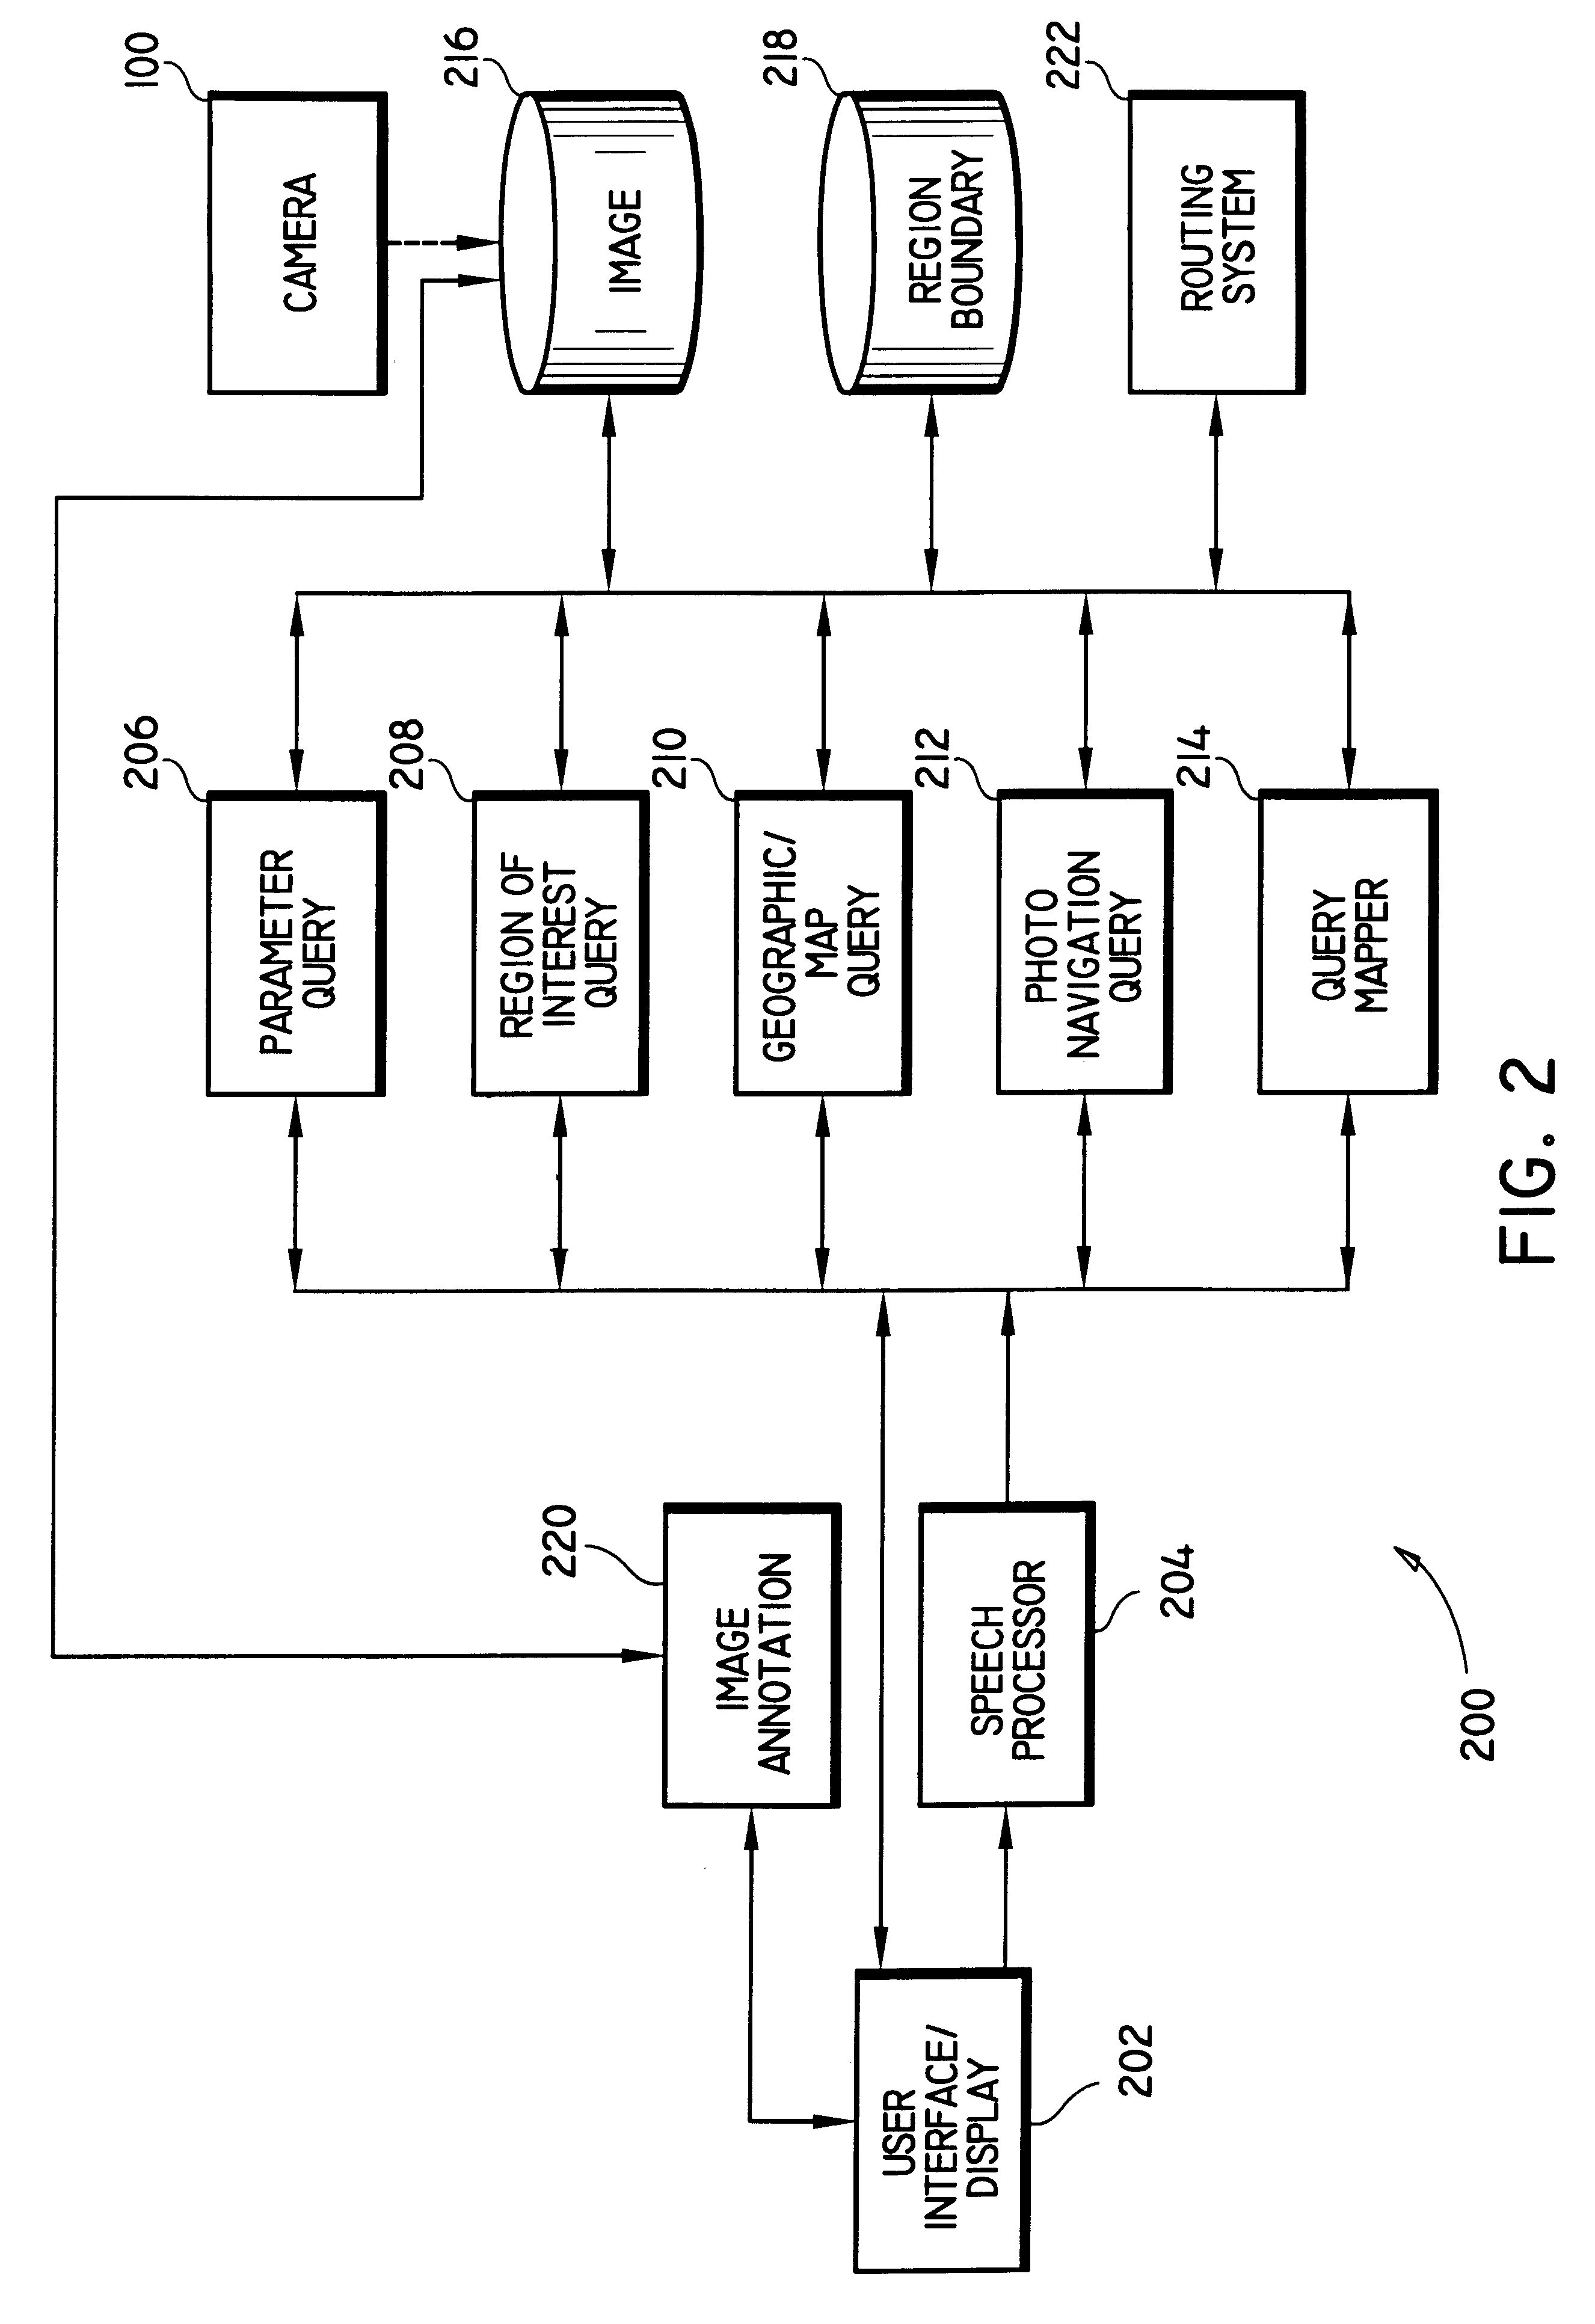 System and methods for querying digital image archives using recorded parameters